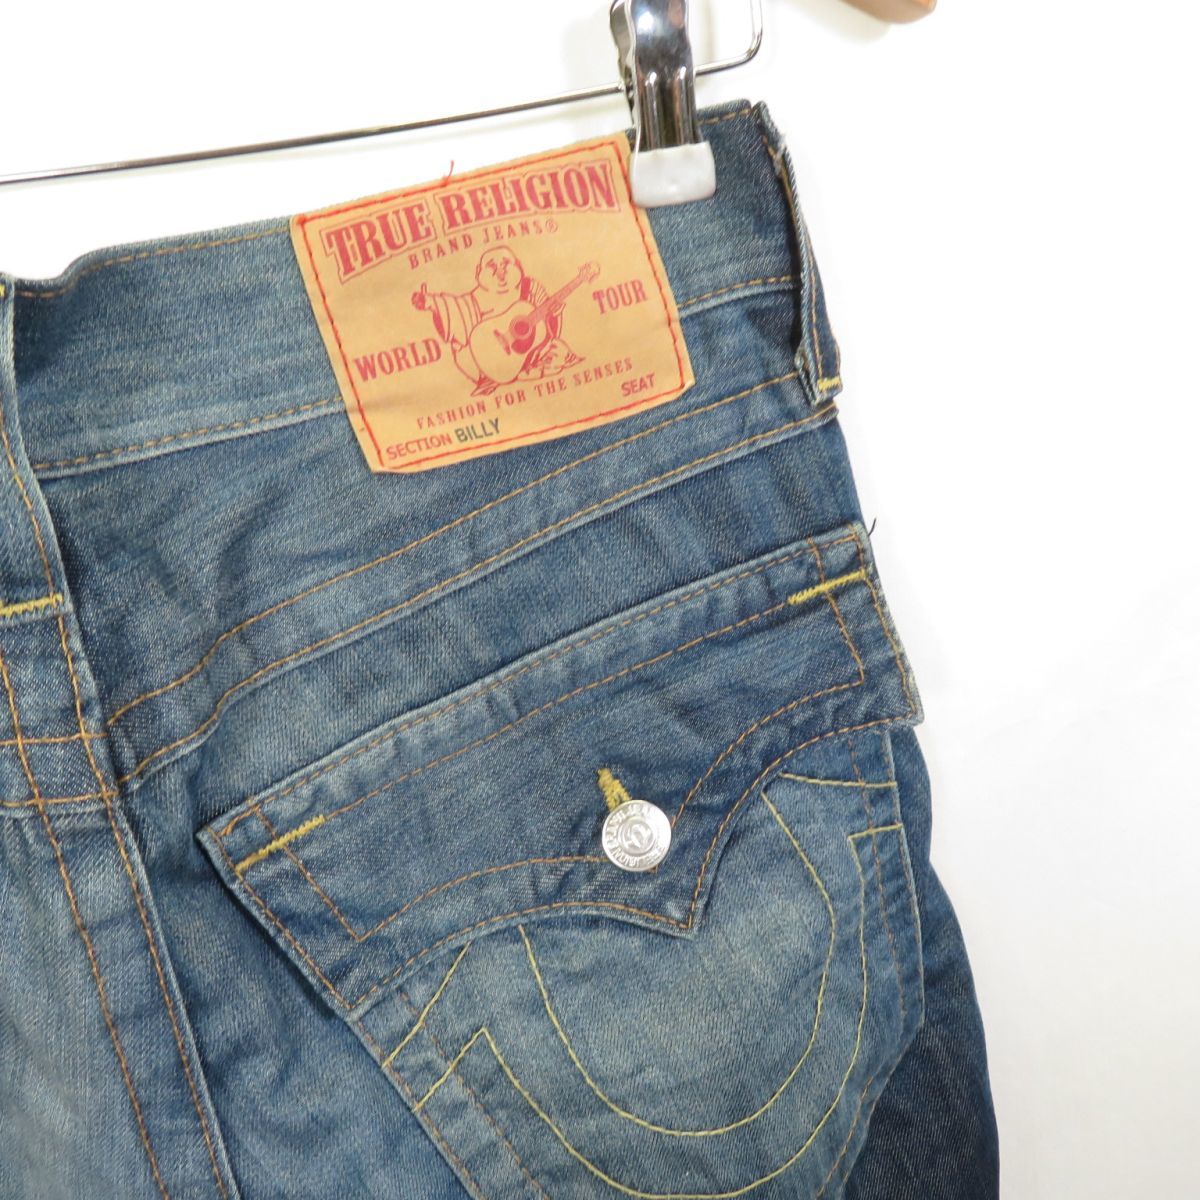 TRUE RELIGION USA made BILLY damage processing boots cut Denim pants jeans size30/ True Religion 0102